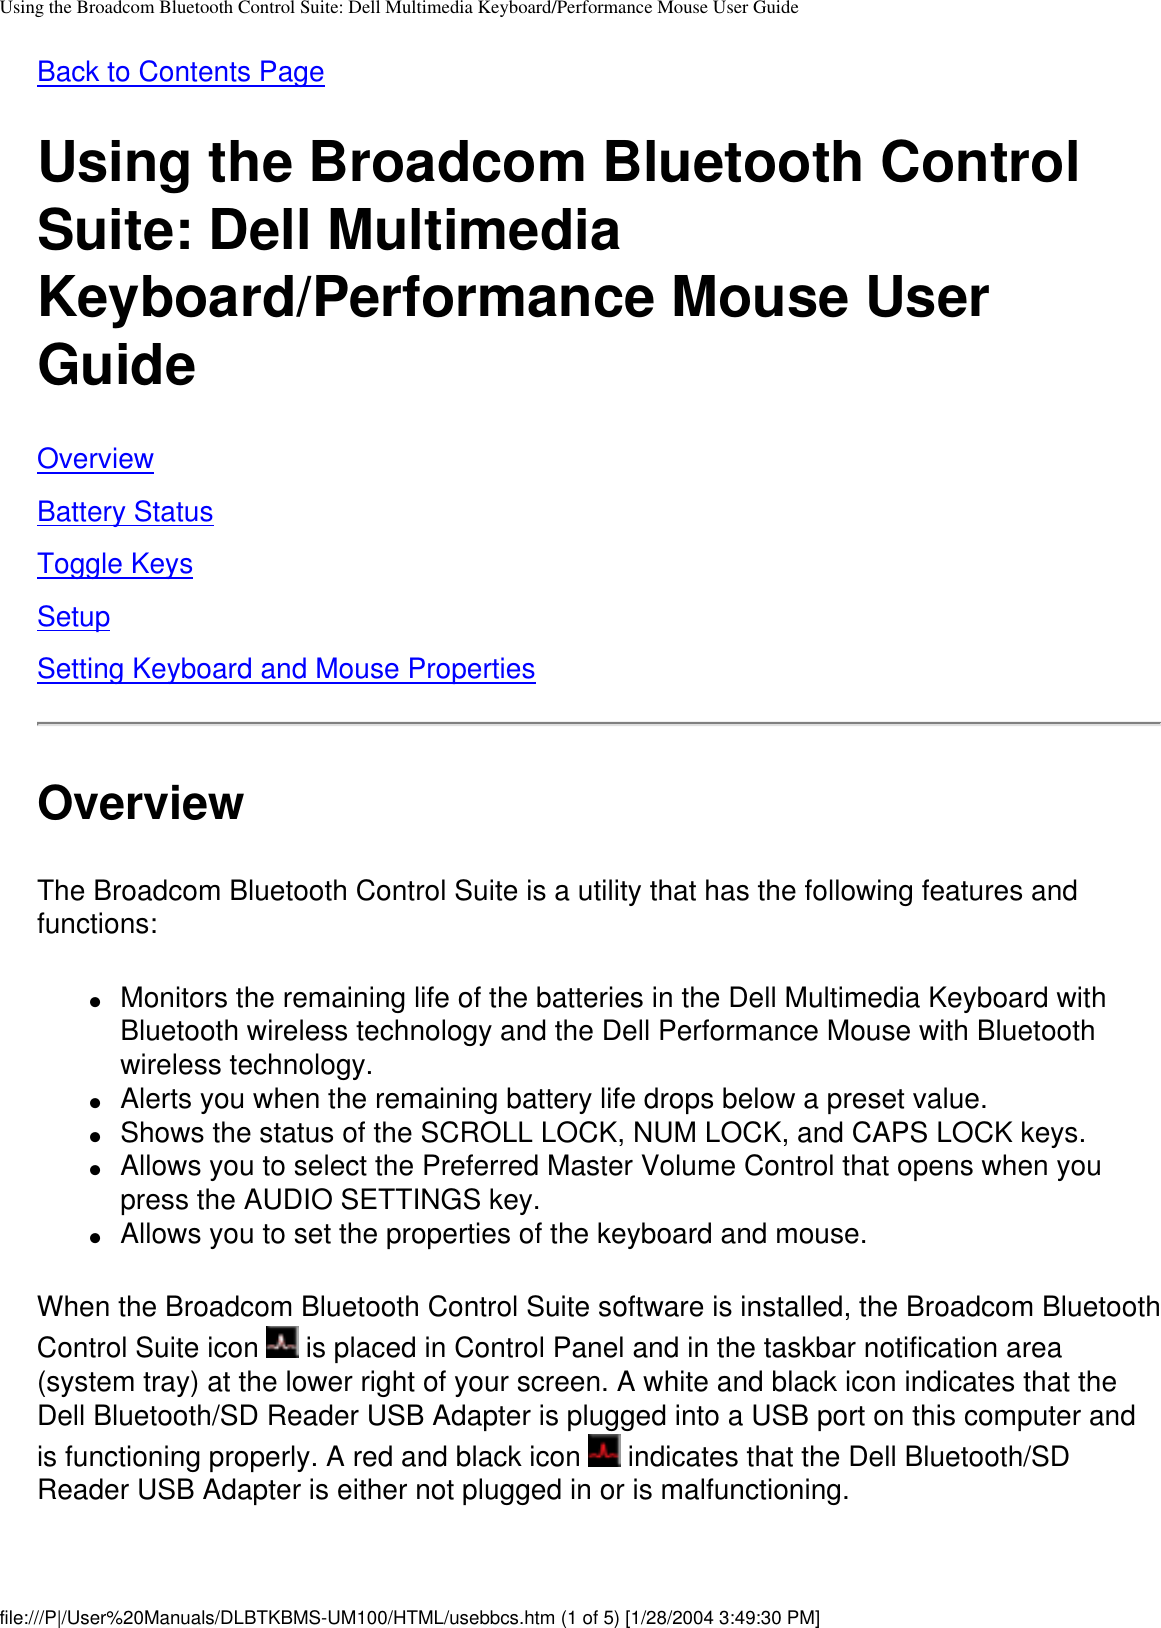 Using the Broadcom Bluetooth Control Suite: Dell Multimedia Keyboard/Performance Mouse User GuideBack to Contents PageUsing the Broadcom Bluetooth Control Suite: Dell Multimedia Keyboard/Performance Mouse User GuideOverviewBattery StatusToggle KeysSetupSetting Keyboard and Mouse PropertiesOverviewThe Broadcom Bluetooth Control Suite is a utility that has the following features and functions:●     Monitors the remaining life of the batteries in the Dell Multimedia Keyboard with Bluetooth wireless technology and the Dell Performance Mouse with Bluetooth wireless technology.●     Alerts you when the remaining battery life drops below a preset value.●     Shows the status of the SCROLL LOCK, NUM LOCK, and CAPS LOCK keys.●     Allows you to select the Preferred Master Volume Control that opens when you press the AUDIO SETTINGS key.●     Allows you to set the properties of the keyboard and mouse.When the Broadcom Bluetooth Control Suite software is installed, the Broadcom Bluetooth Control Suite icon   is placed in Control Panel and in the taskbar notification area (system tray) at the lower right of your screen. A white and black icon indicates that the Dell Bluetooth/SD Reader USB Adapter is plugged into a USB port on this computer and is functioning properly. A red and black icon   indicates that the Dell Bluetooth/SD Reader USB Adapter is either not plugged in or is malfunctioning.file:///P|/User%20Manuals/DLBTKBMS-UM100/HTML/usebbcs.htm (1 of 5) [1/28/2004 3:49:30 PM]